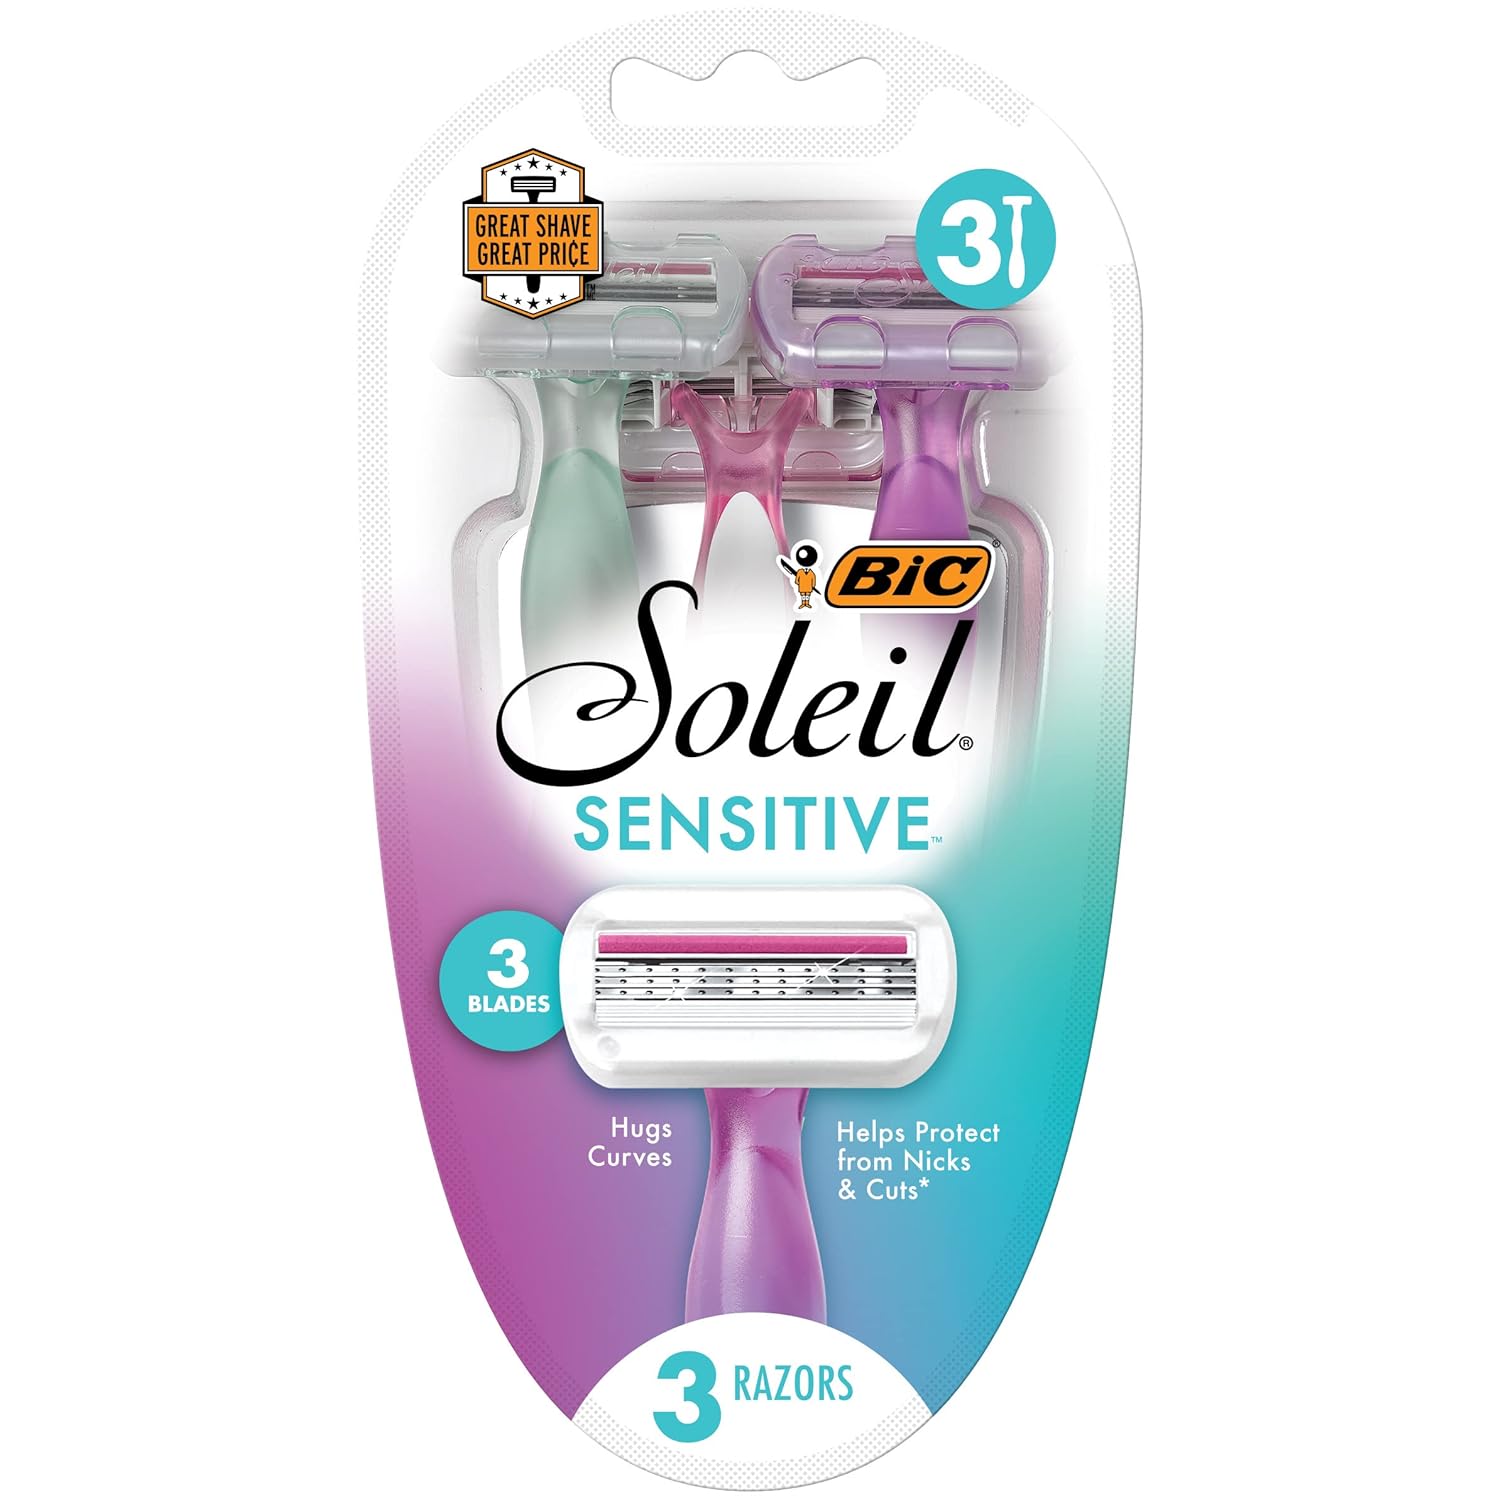 BIC Soleil Sensitive Women's Disposable Razors, 3 Blades With Moisture Strip For a Silky Smooth Shave, 6 Piece Razor Set, 3 Count (Pack of 2)